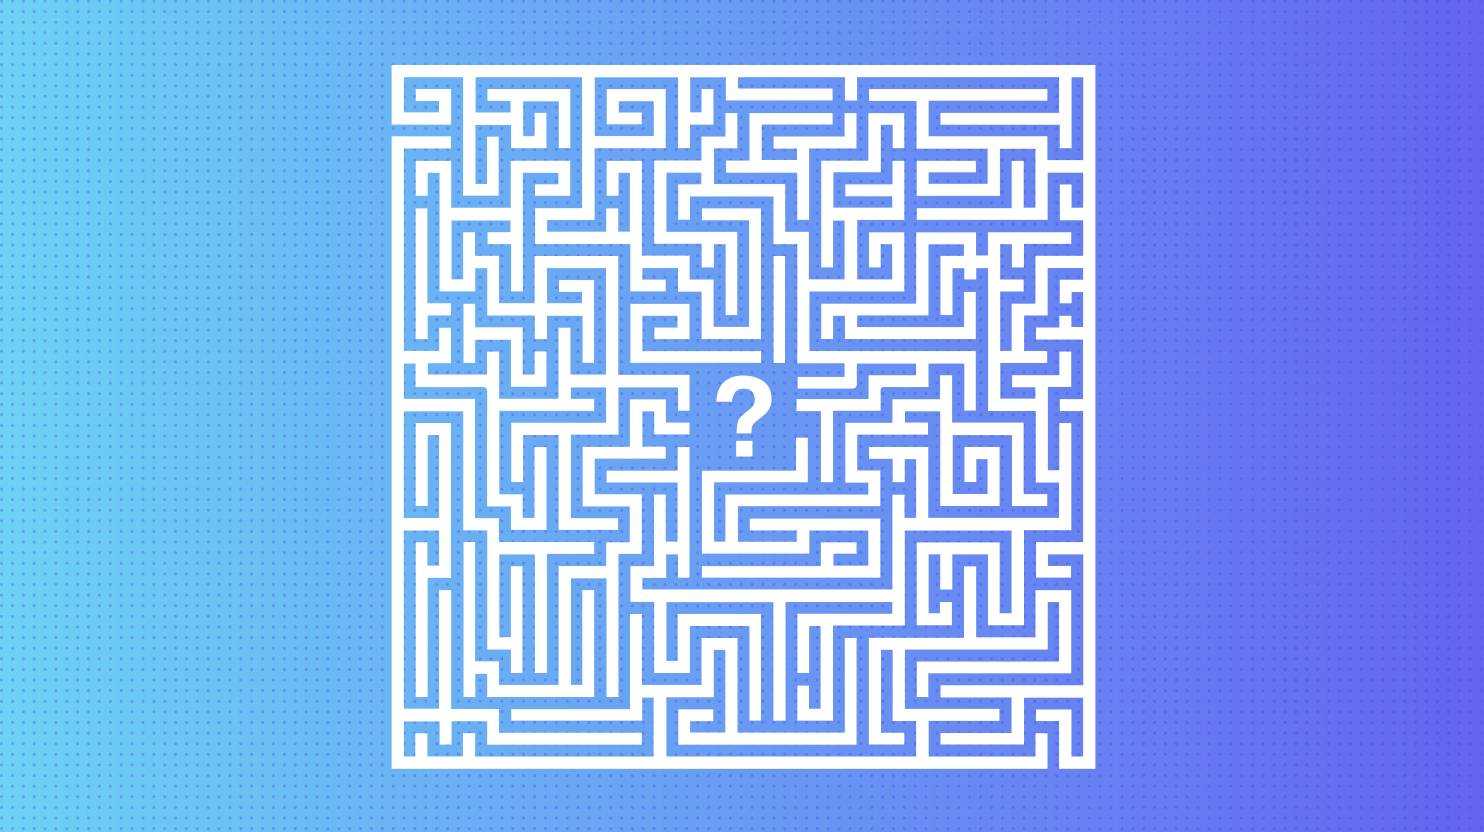 a maze with a question mark at the center of it